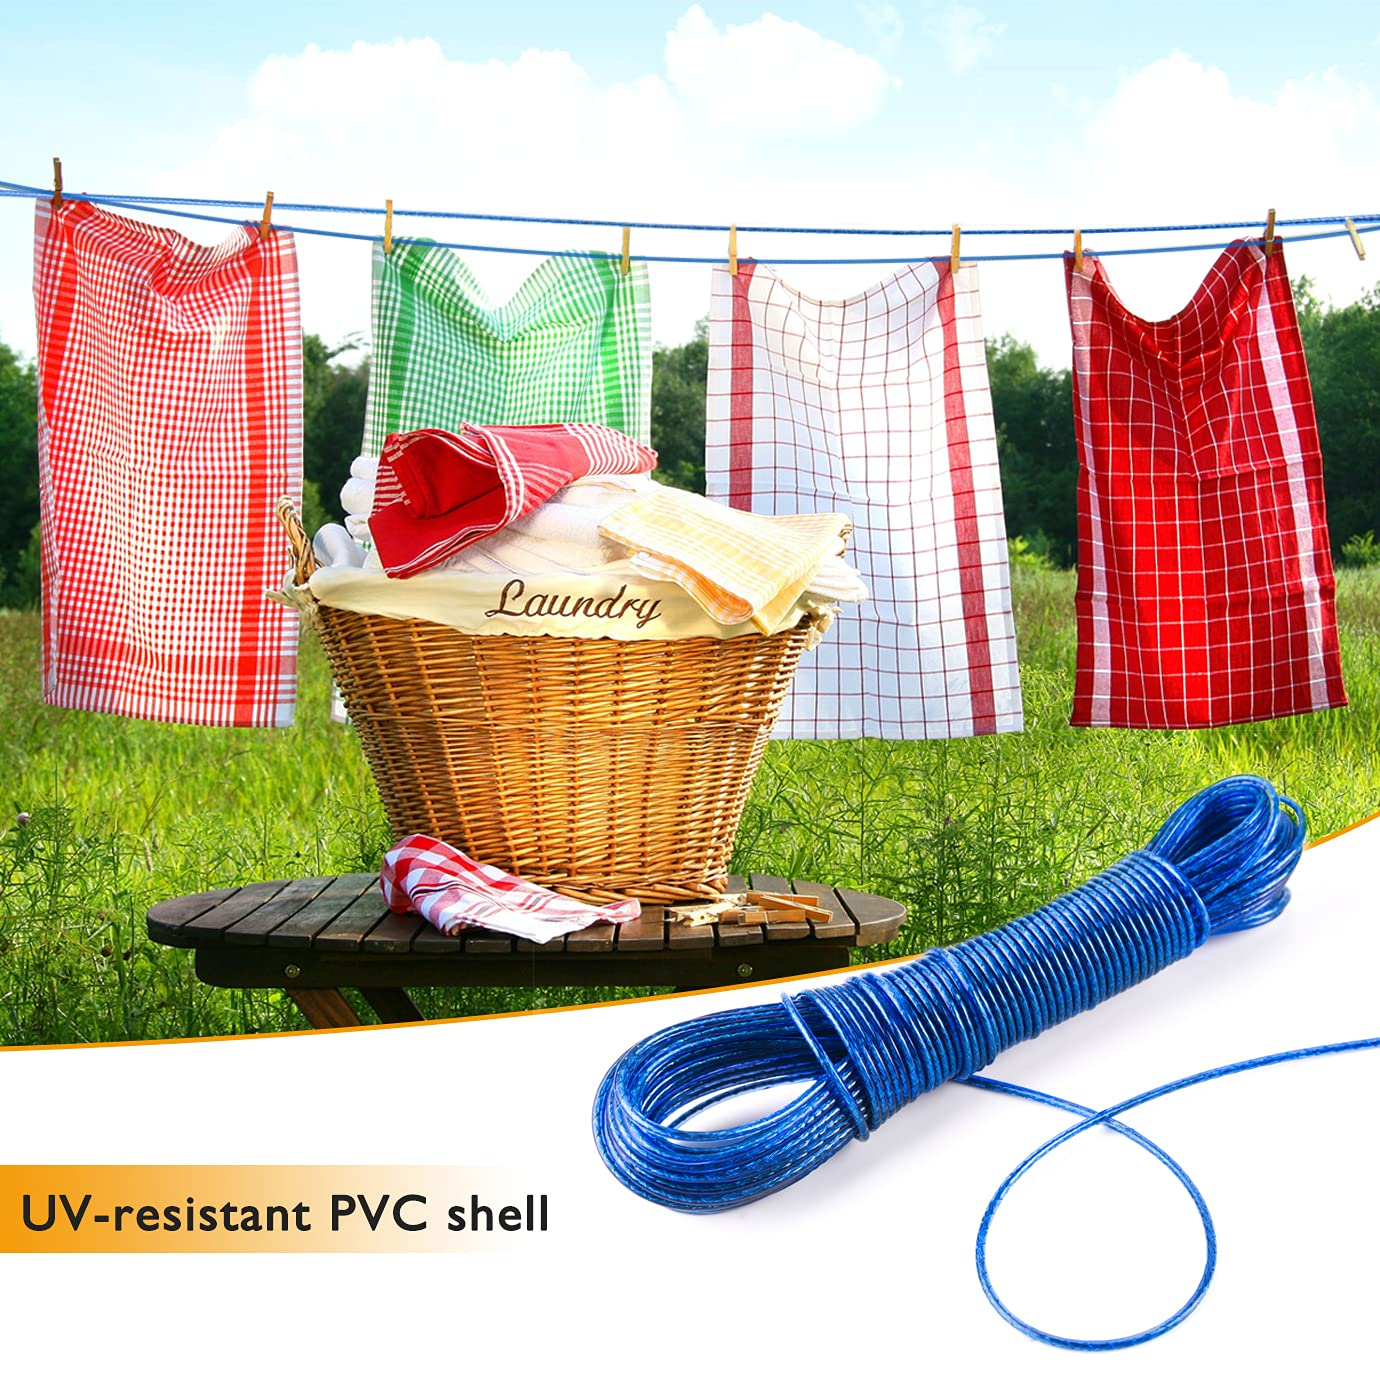 20M PVC Clothes Line Laundry Washing Line Steel Core Plastic Coated Outdoor BLUE 